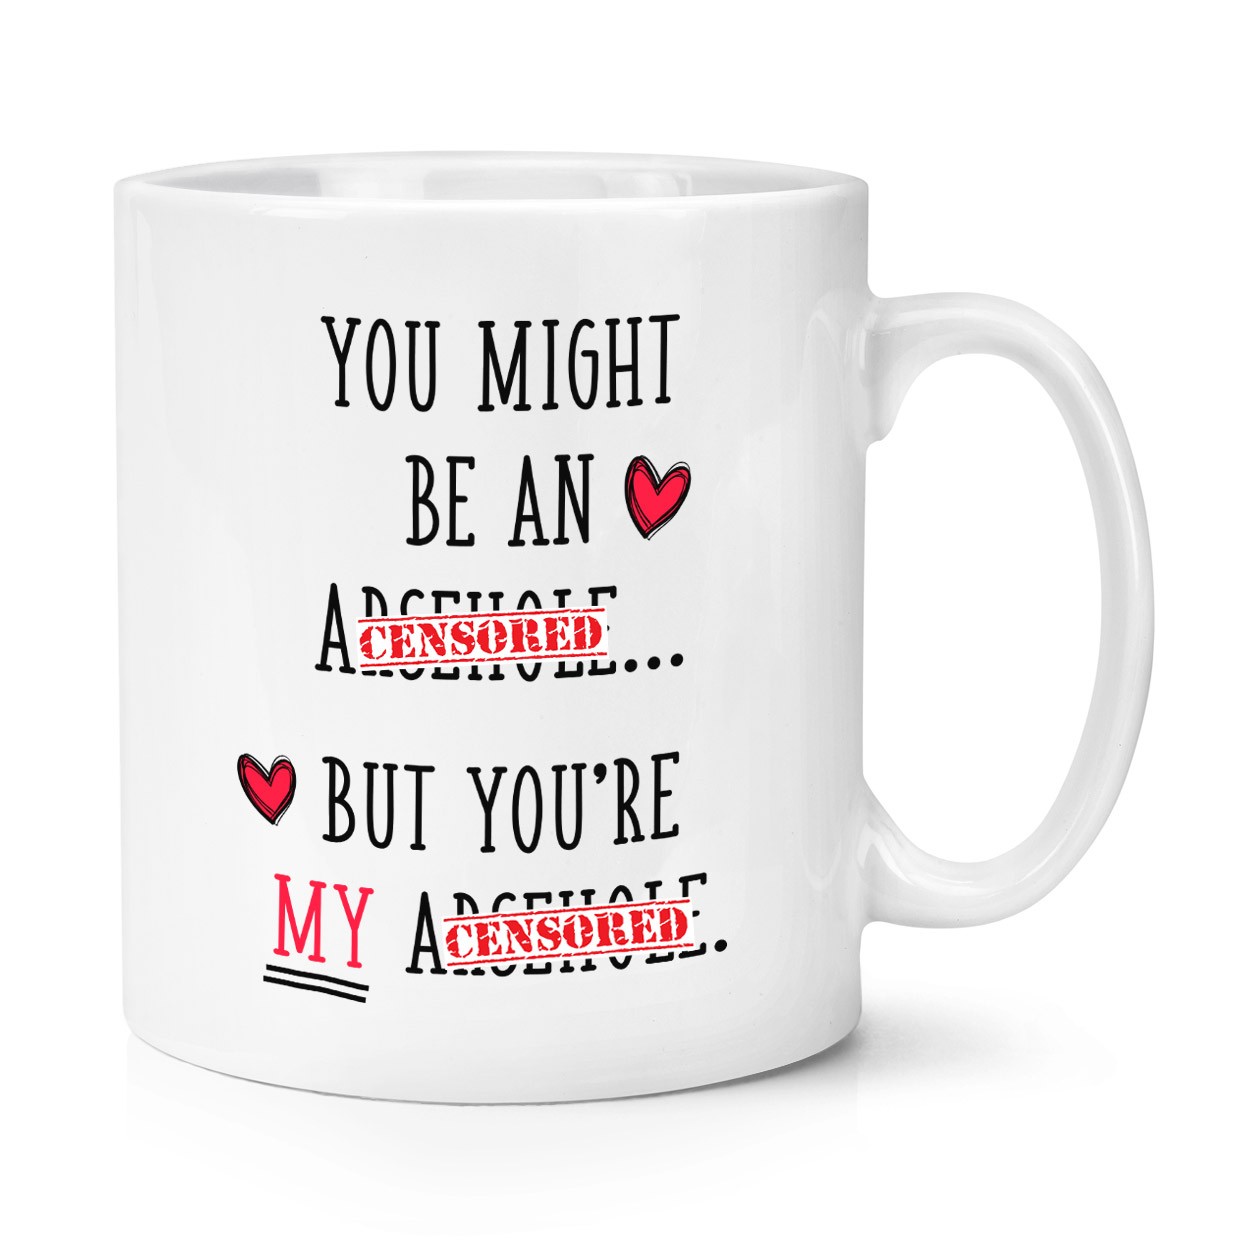 You Might Be An Arsehole But You're My Arsehole 10oz Mug Cup